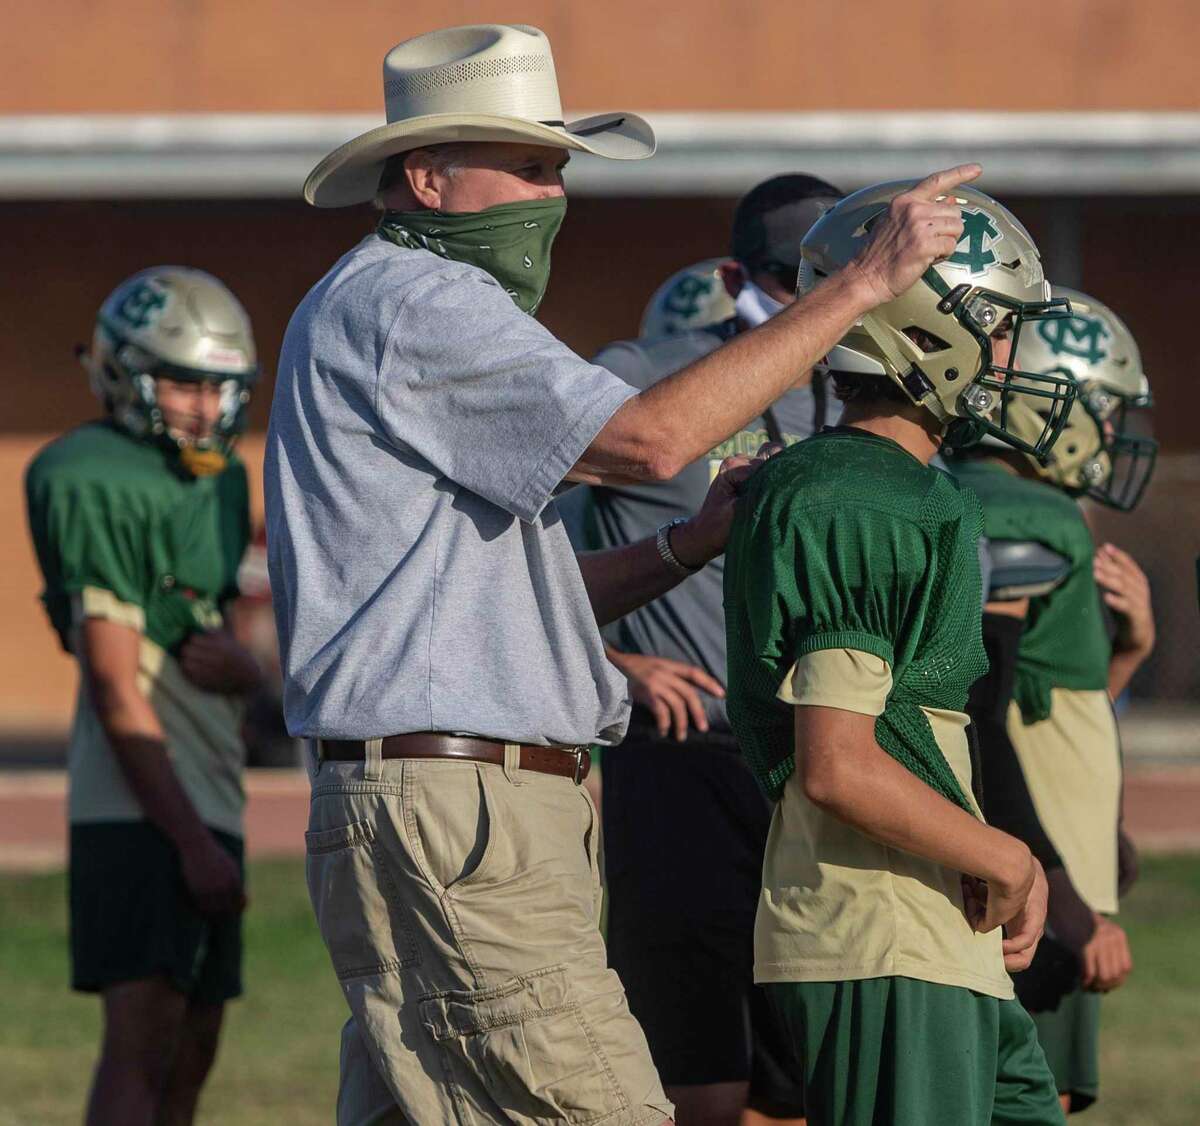 McCollum High School coach Carl Klann runs through drills Wednesday, Nov. 11, 2020 with the team as they prepare for their first game after having to forfeit three games due to positive COVID-19 coronavirus tests.